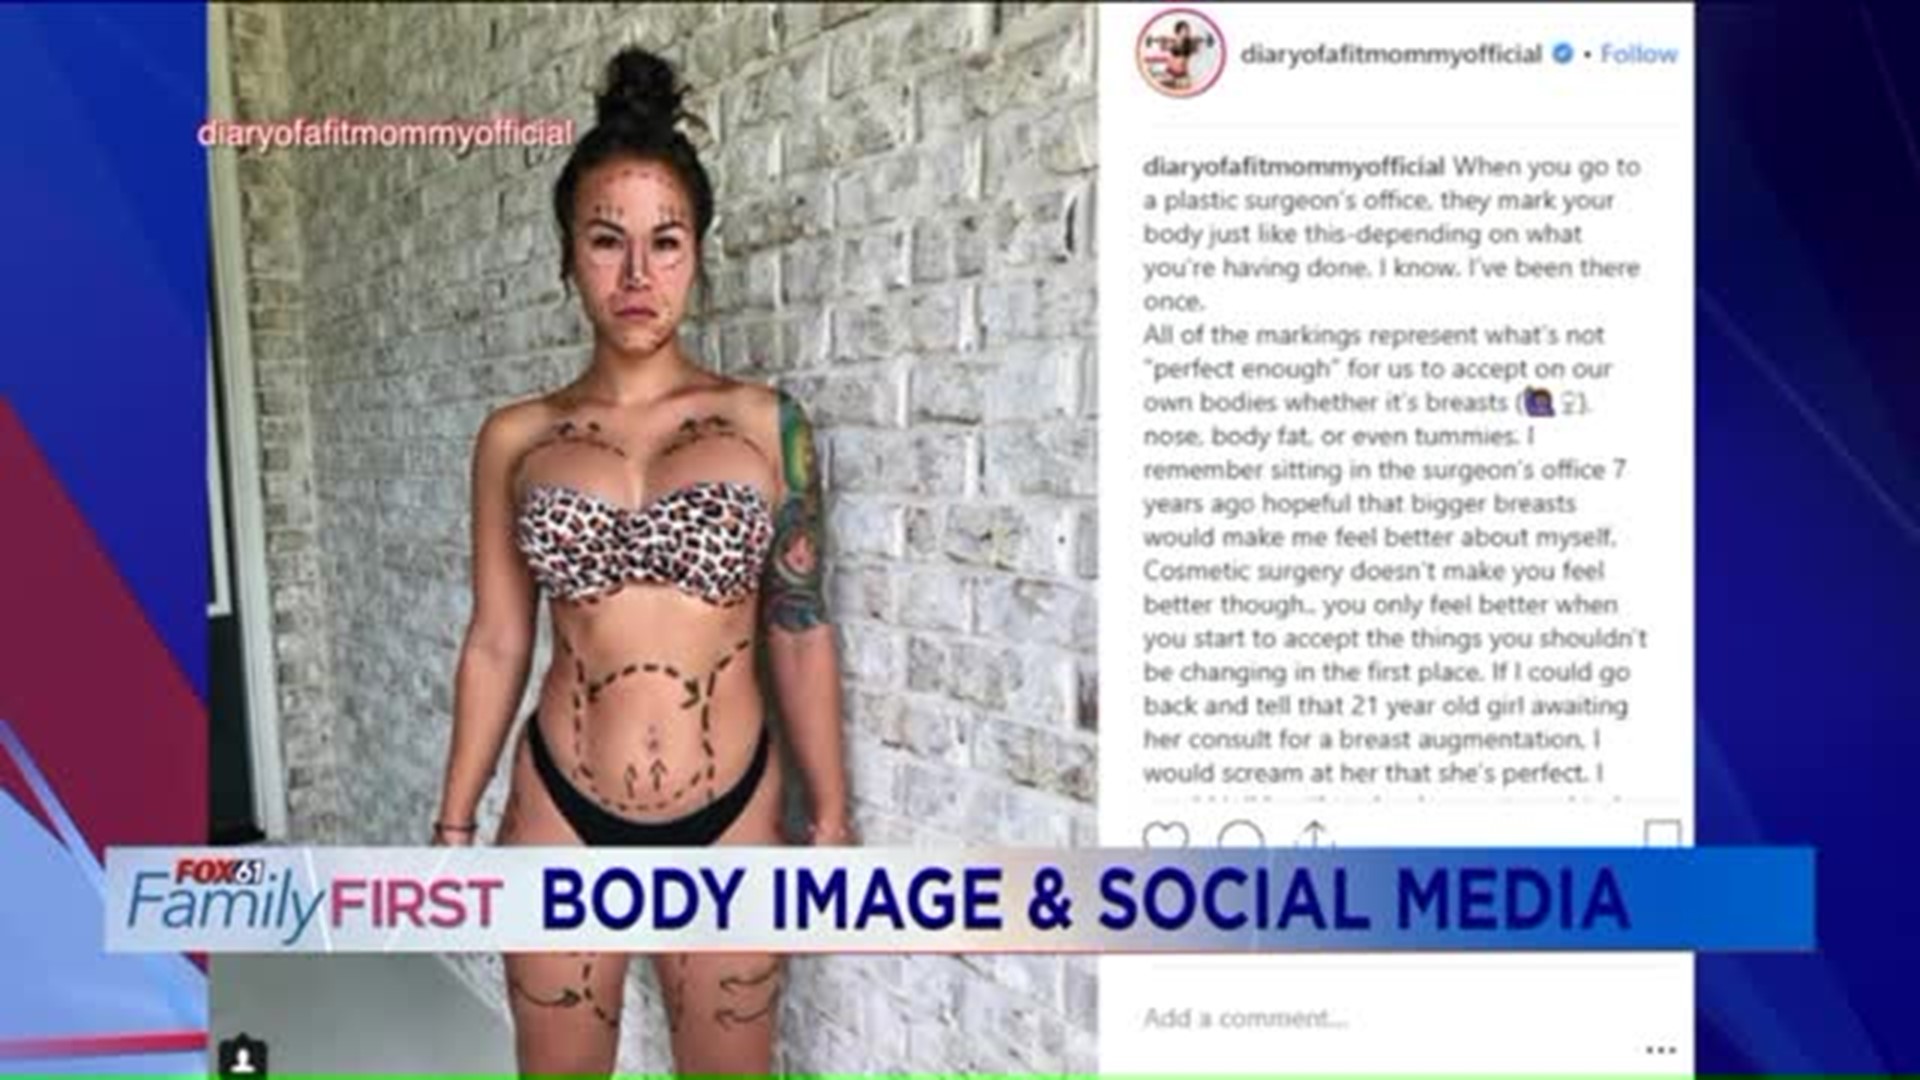 Family First: Fostering Better Body Images